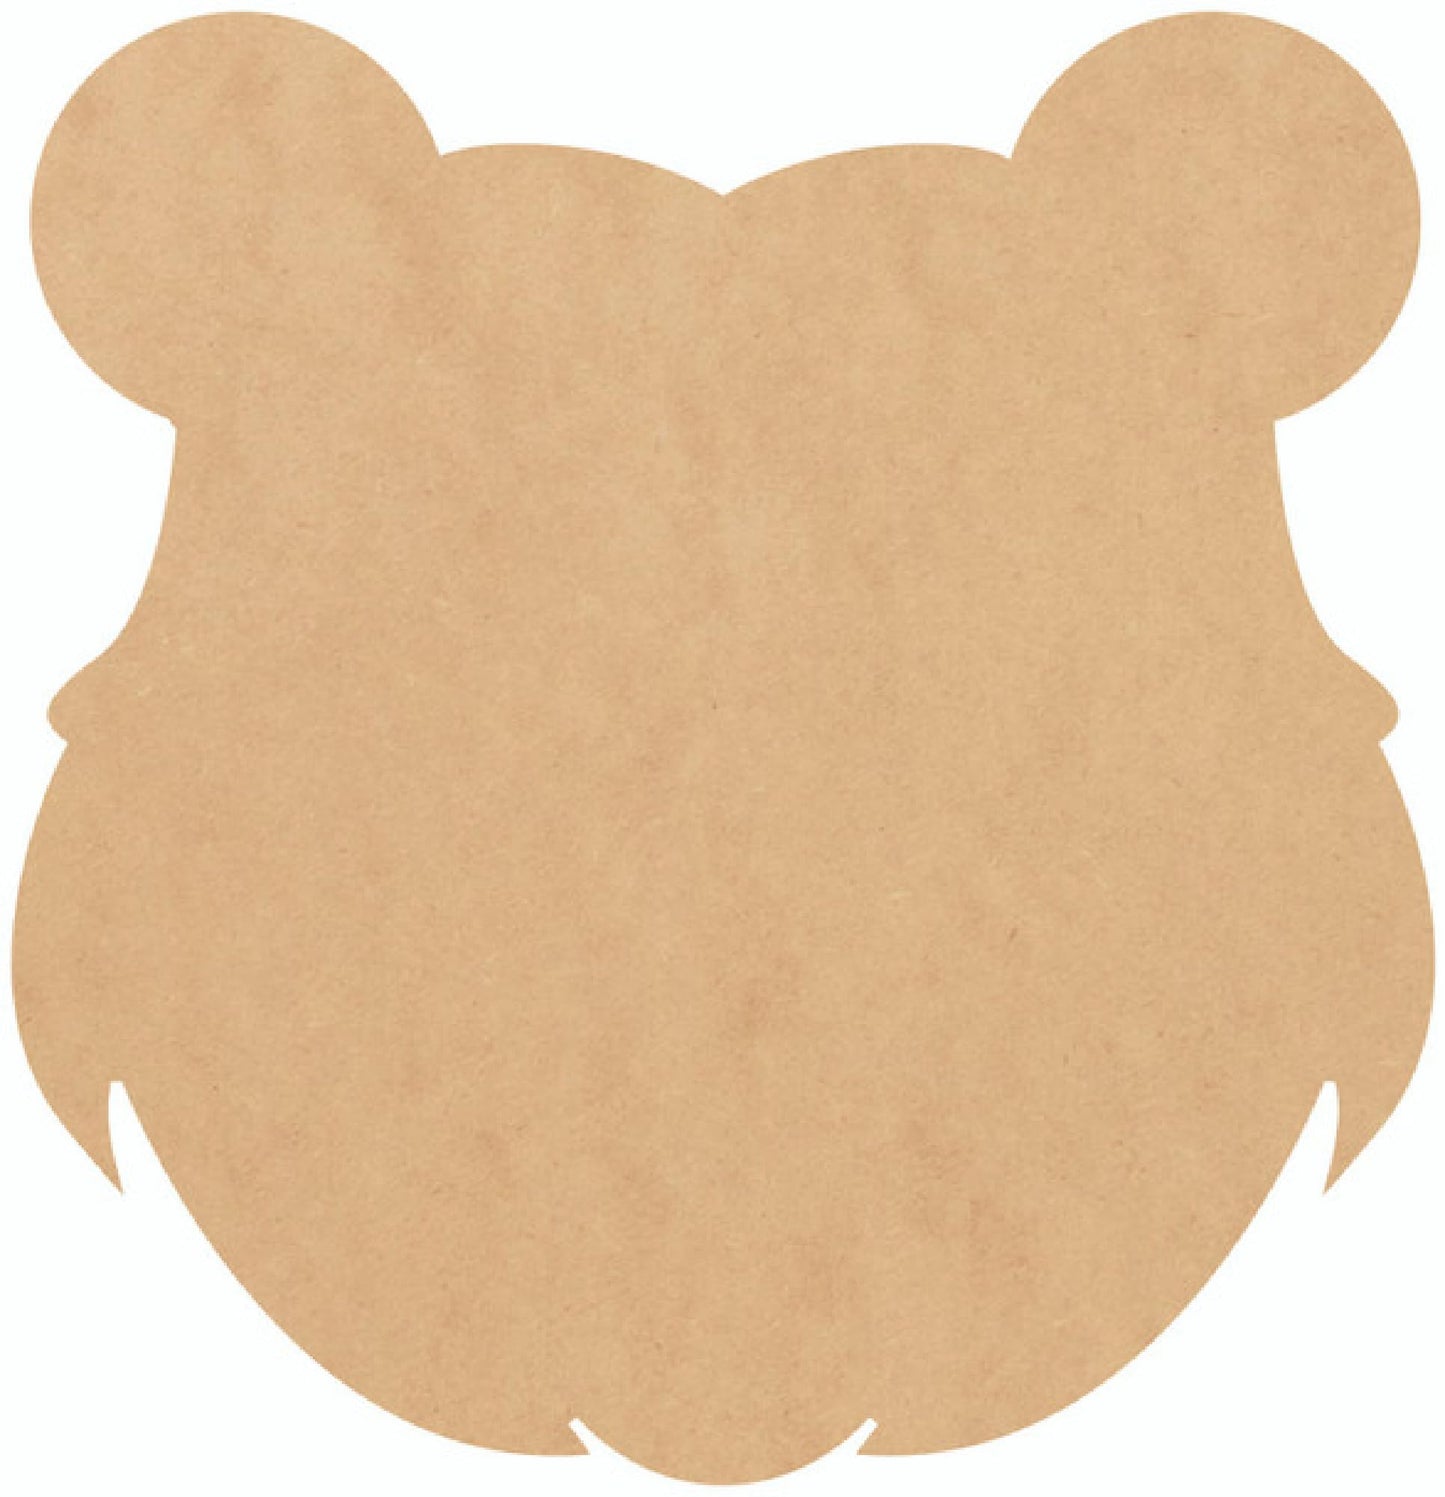 Wooden Bear Head Paintable 6" Cutout, Unfinished Wood MDF 1/8" Wall Animal Craft